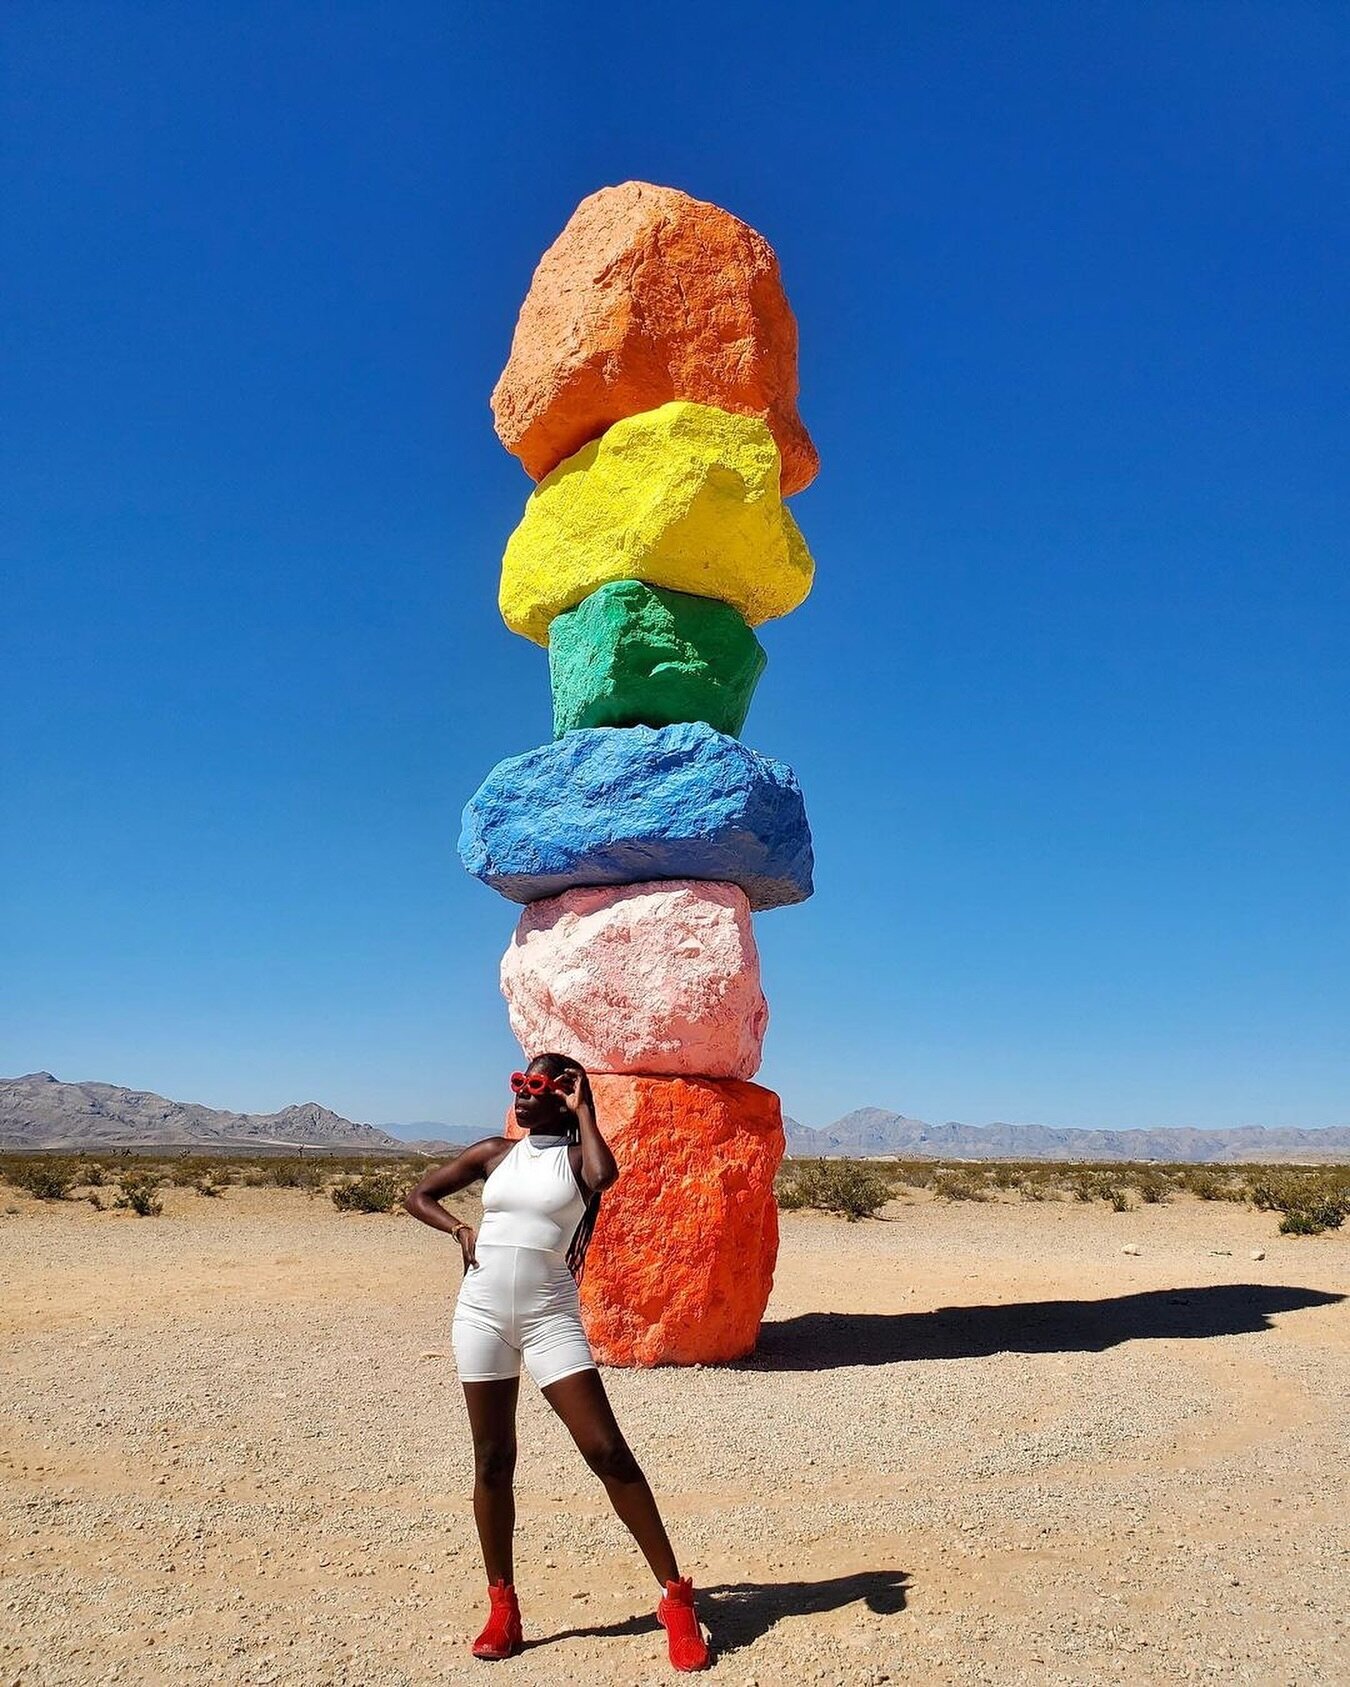 🟧 Strike a pose at #SevenMagicMountains, a free and open-to-the-public installation by renowned Swiss artist Ugo Rondinone (@ugorondinone0) commissioned by APF &amp; @nevadaart.&nbsp;

🟨&nbsp; Seven Magic Mountains is located approximately 10 miles